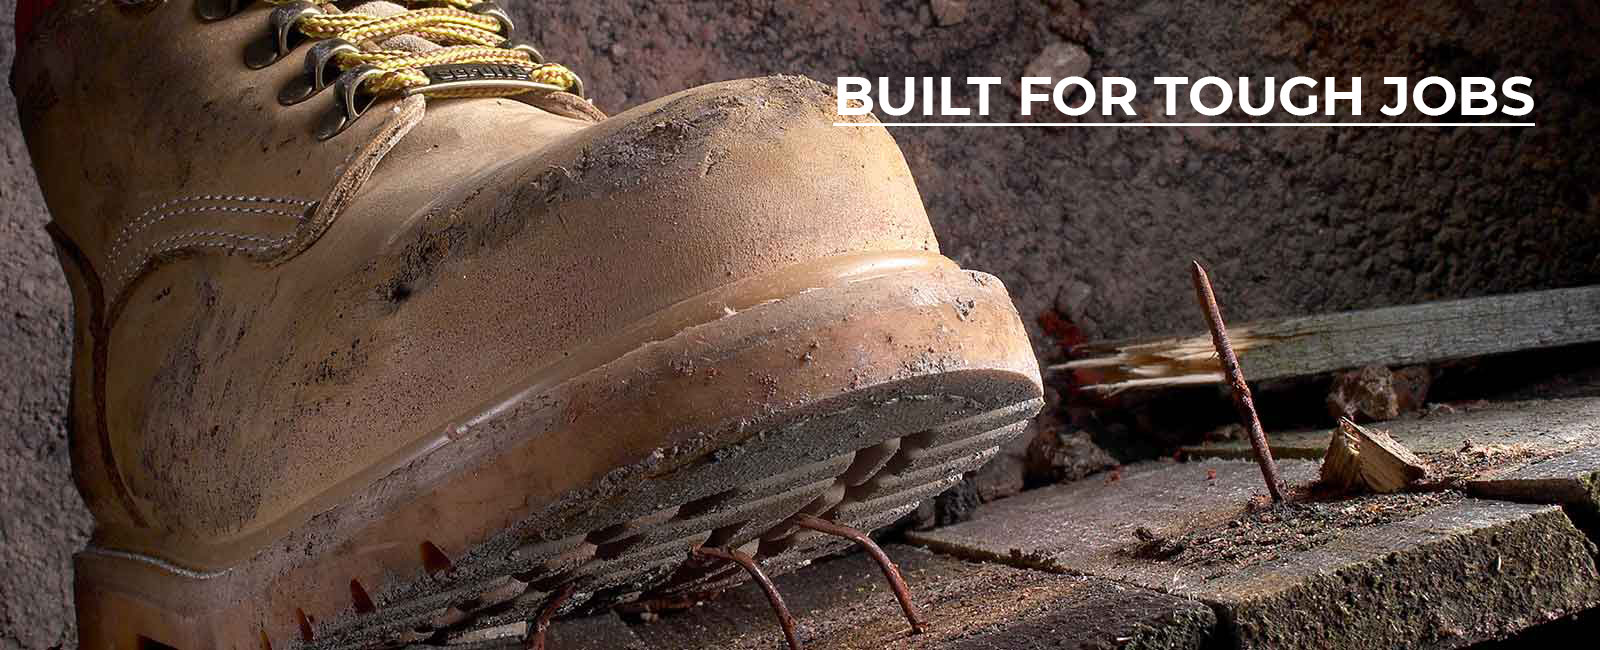 Safety Shoes Manufacturers/Suppliers/Dealers/Exporters in India